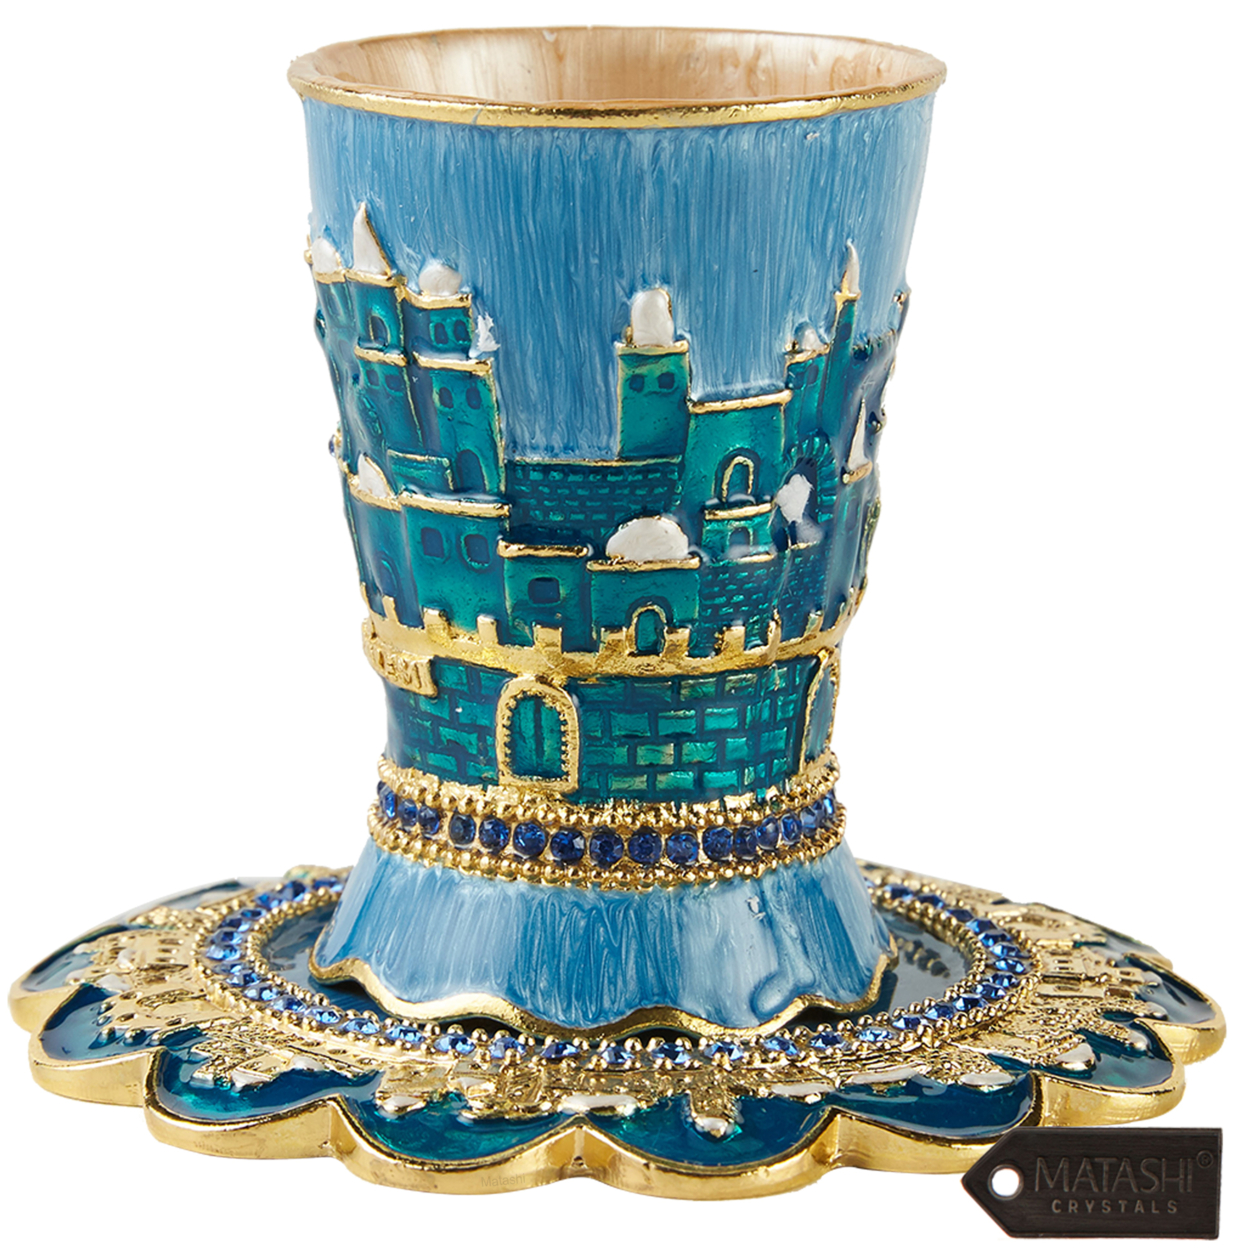 Matashi Hand-Painted Enamel Kiddush Cup Set W Tray W Crystals & Jerusalem Cityscape Design For Shabbat Goblet Judaica Gift Blessings Cup